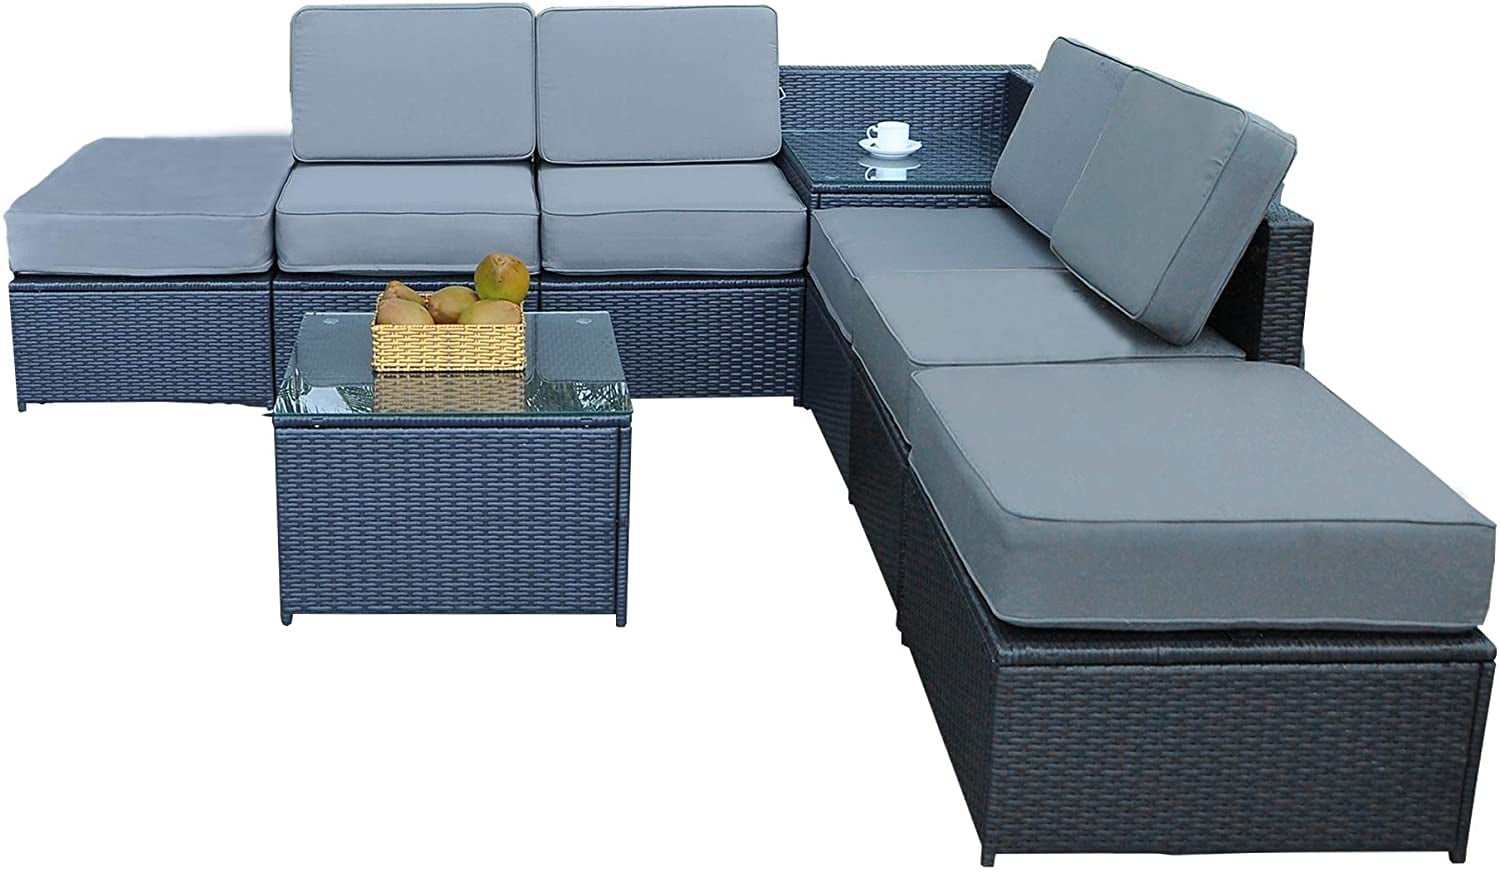 Blue MCombo Outdoor Patio Black Wicker Furniture Sectional Set All-Weather Resin Rattan Chair Conversation Sofas with Water Resistant Cushion Covers 6085-1008A6 